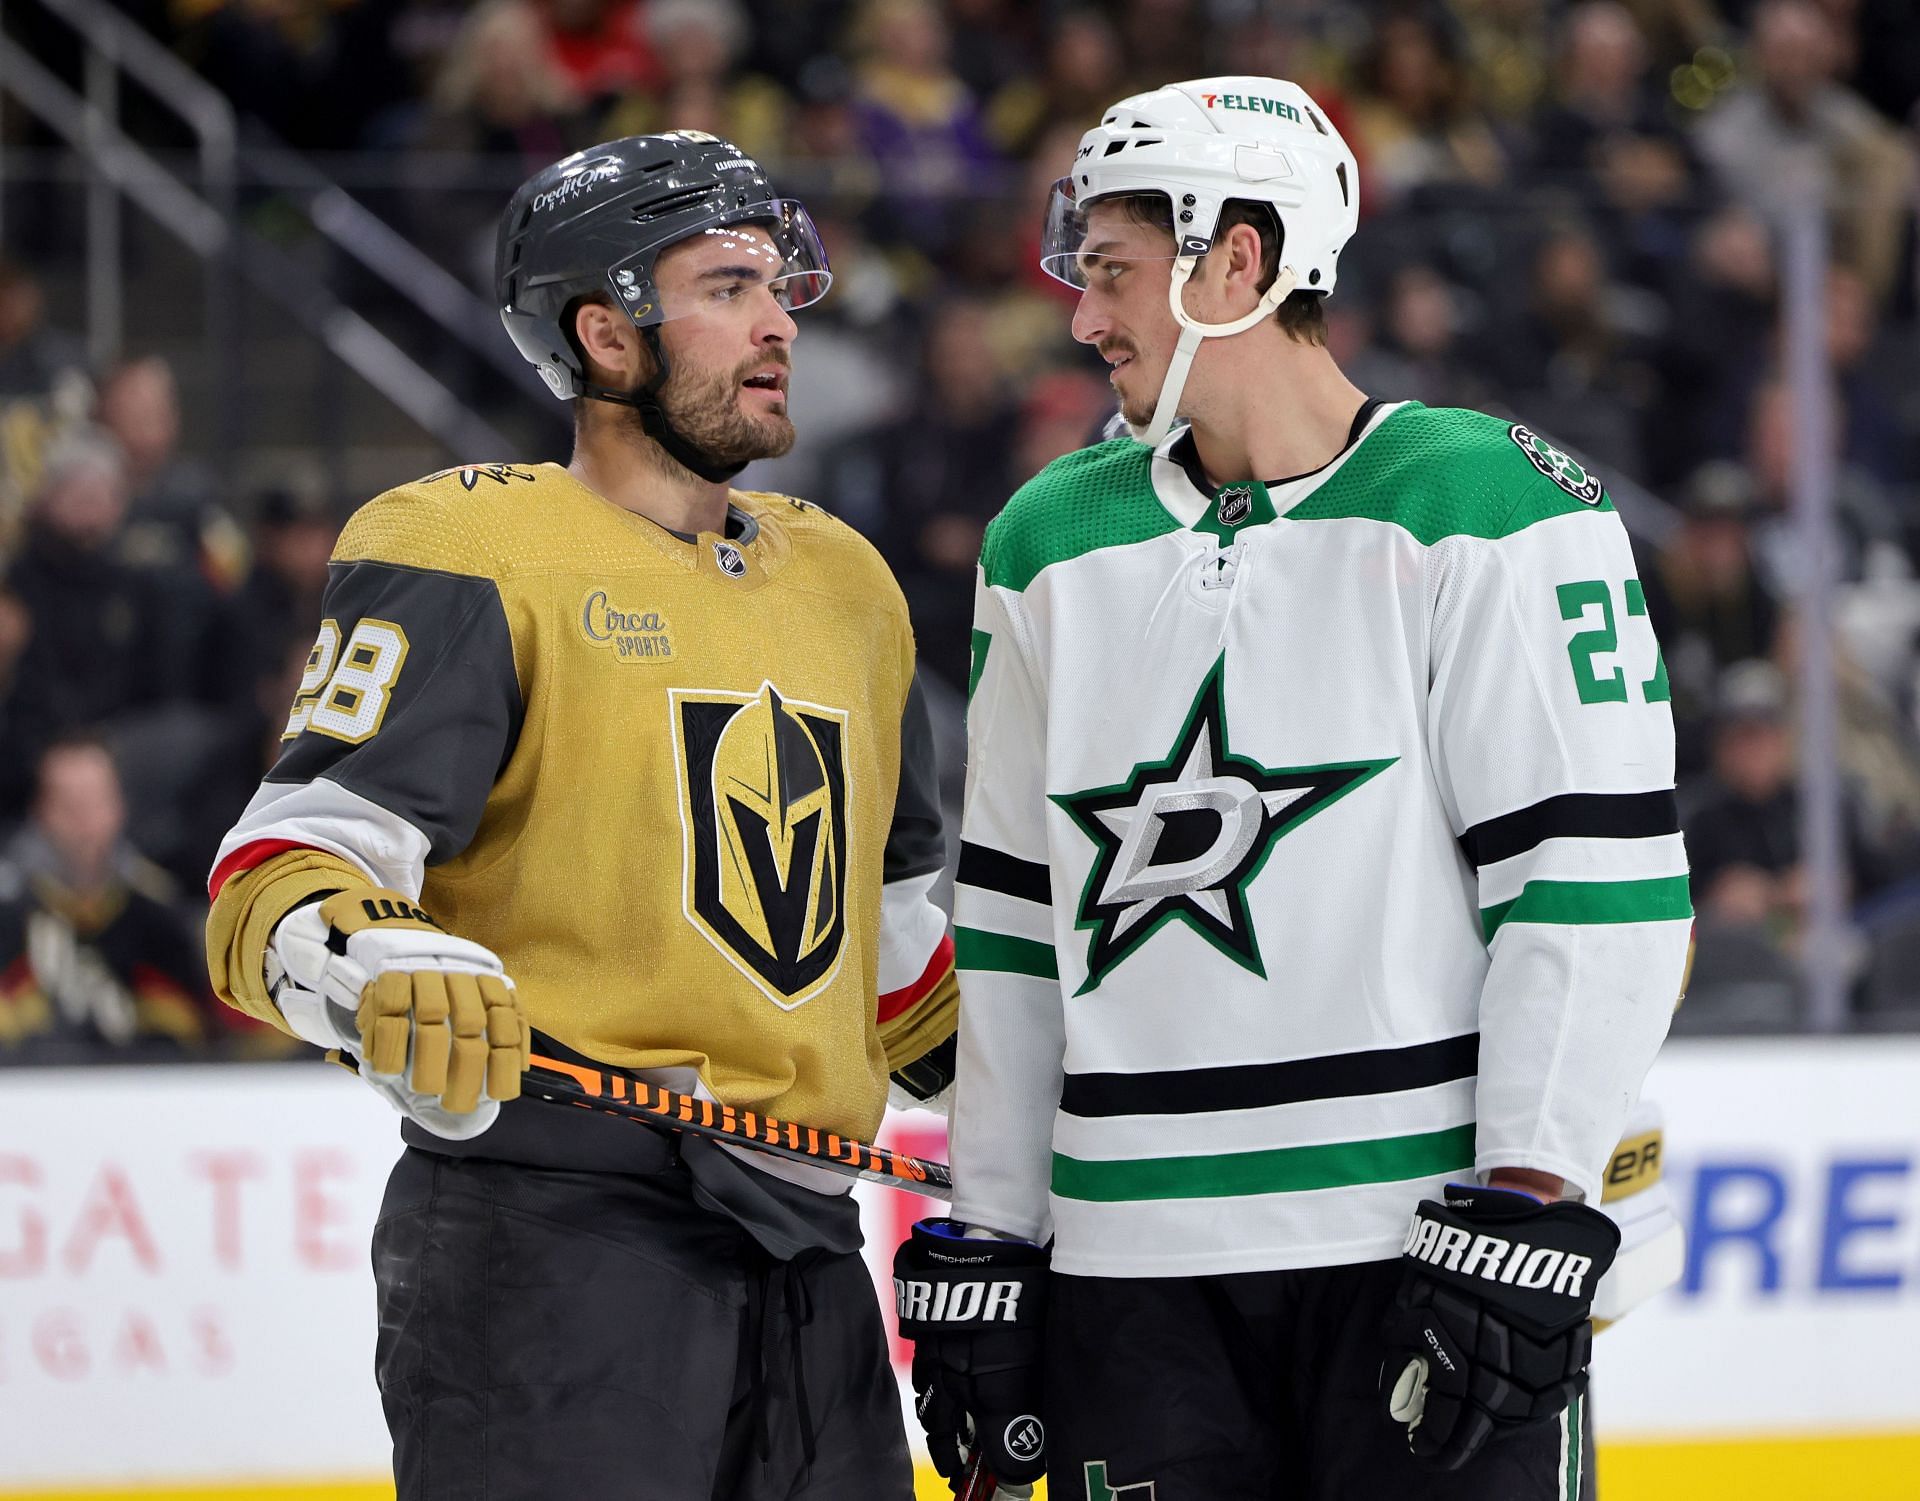 Vegas Golden Knights vs Dallas Stars Game 1 How to watch, TV channel